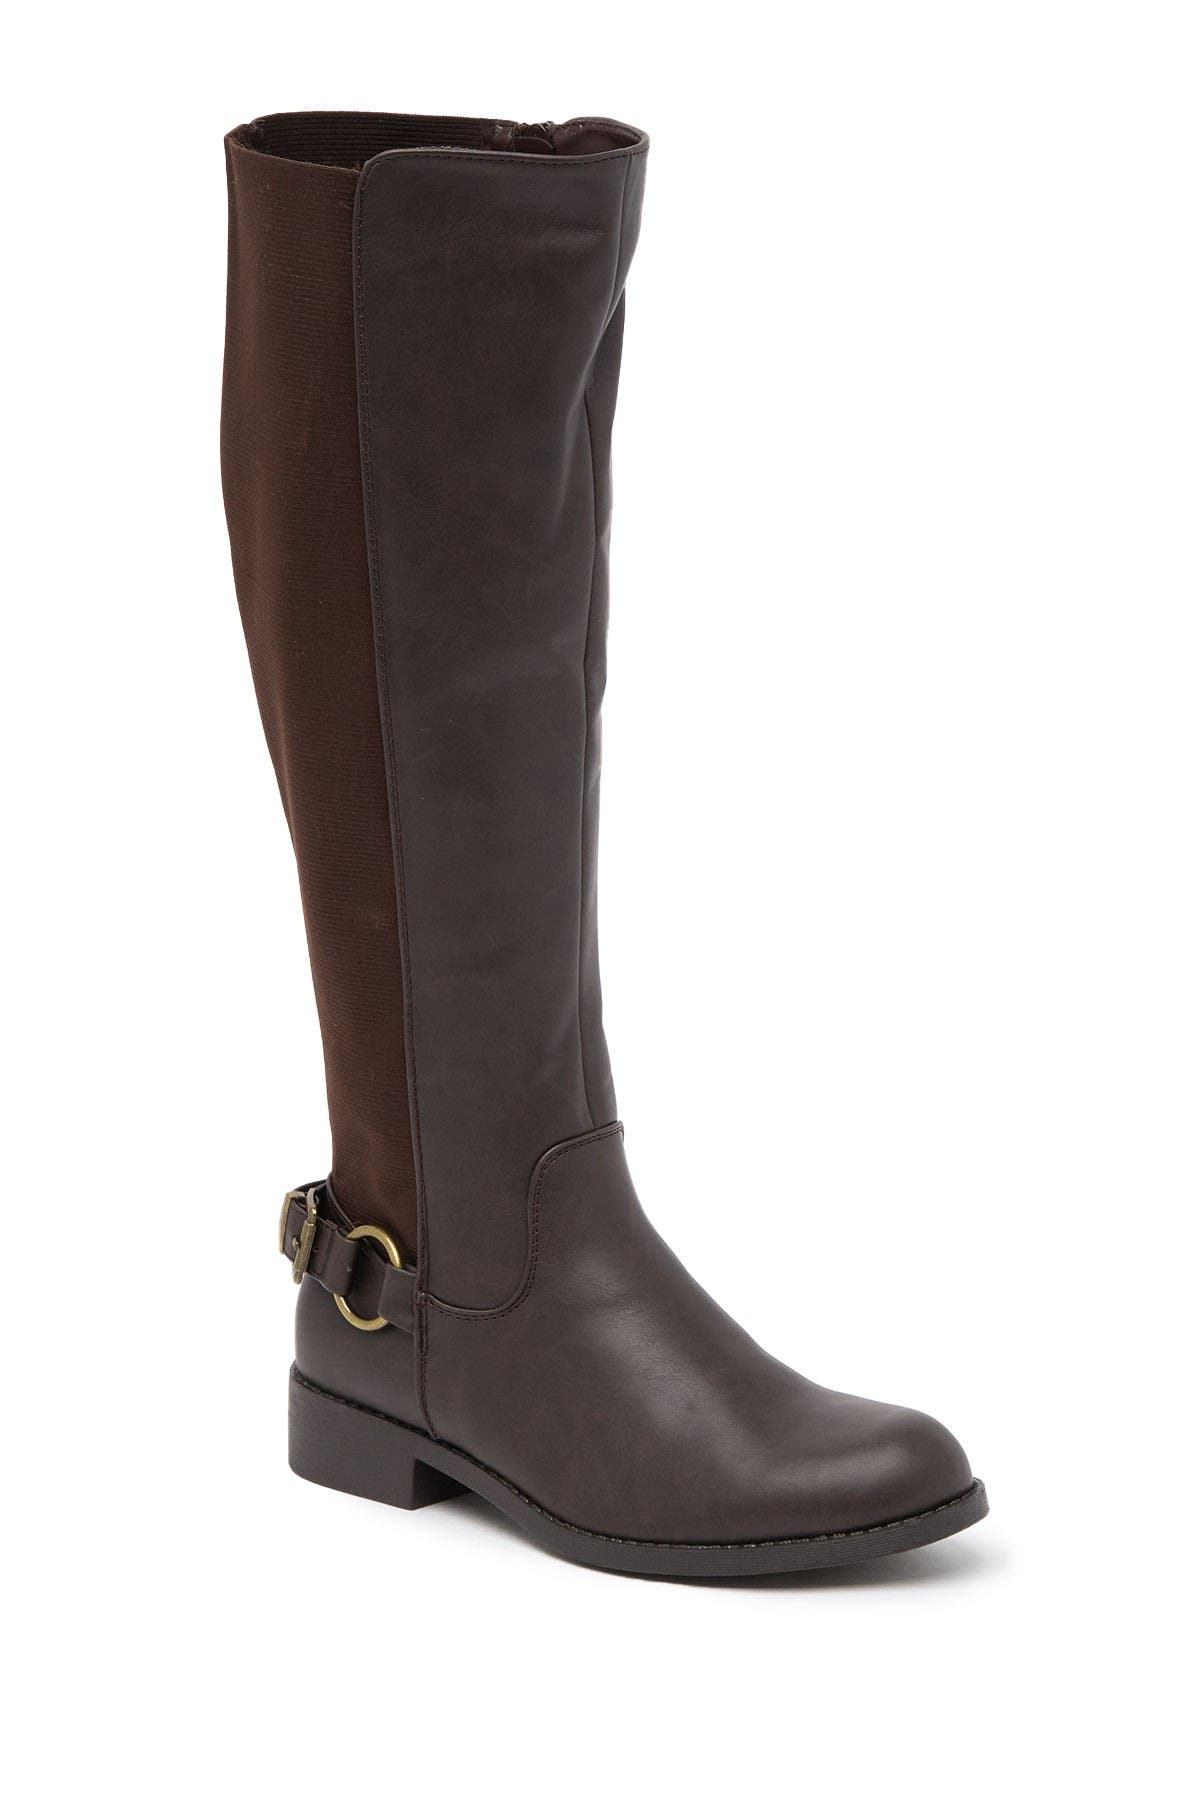 MIA | Anderson Tall Boot | Nordstrom Rack